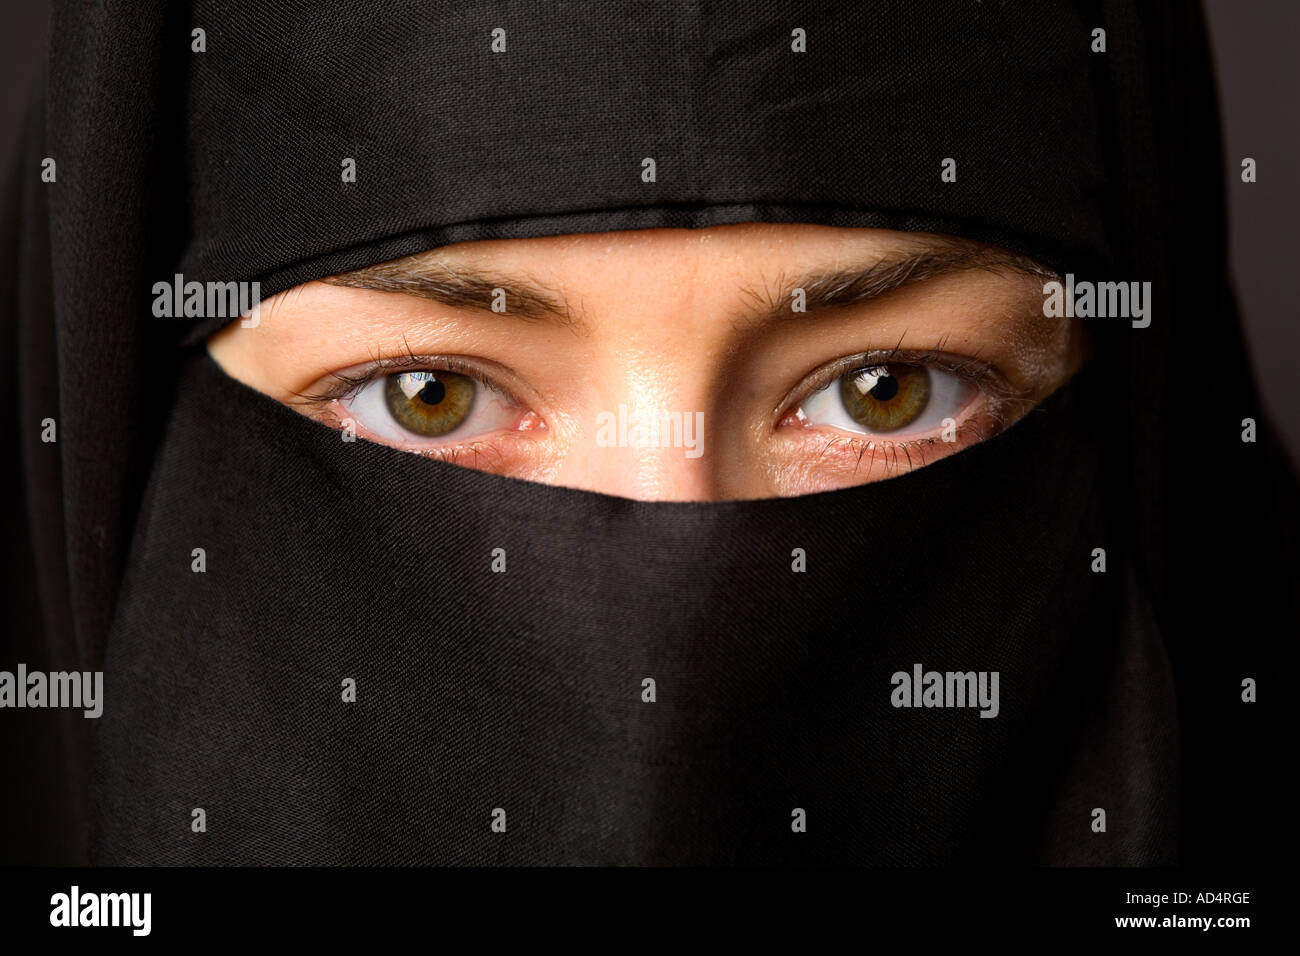 Close up head shot of a Muslim woman in a black hijab with eyes looking straight ahead Stock Photo